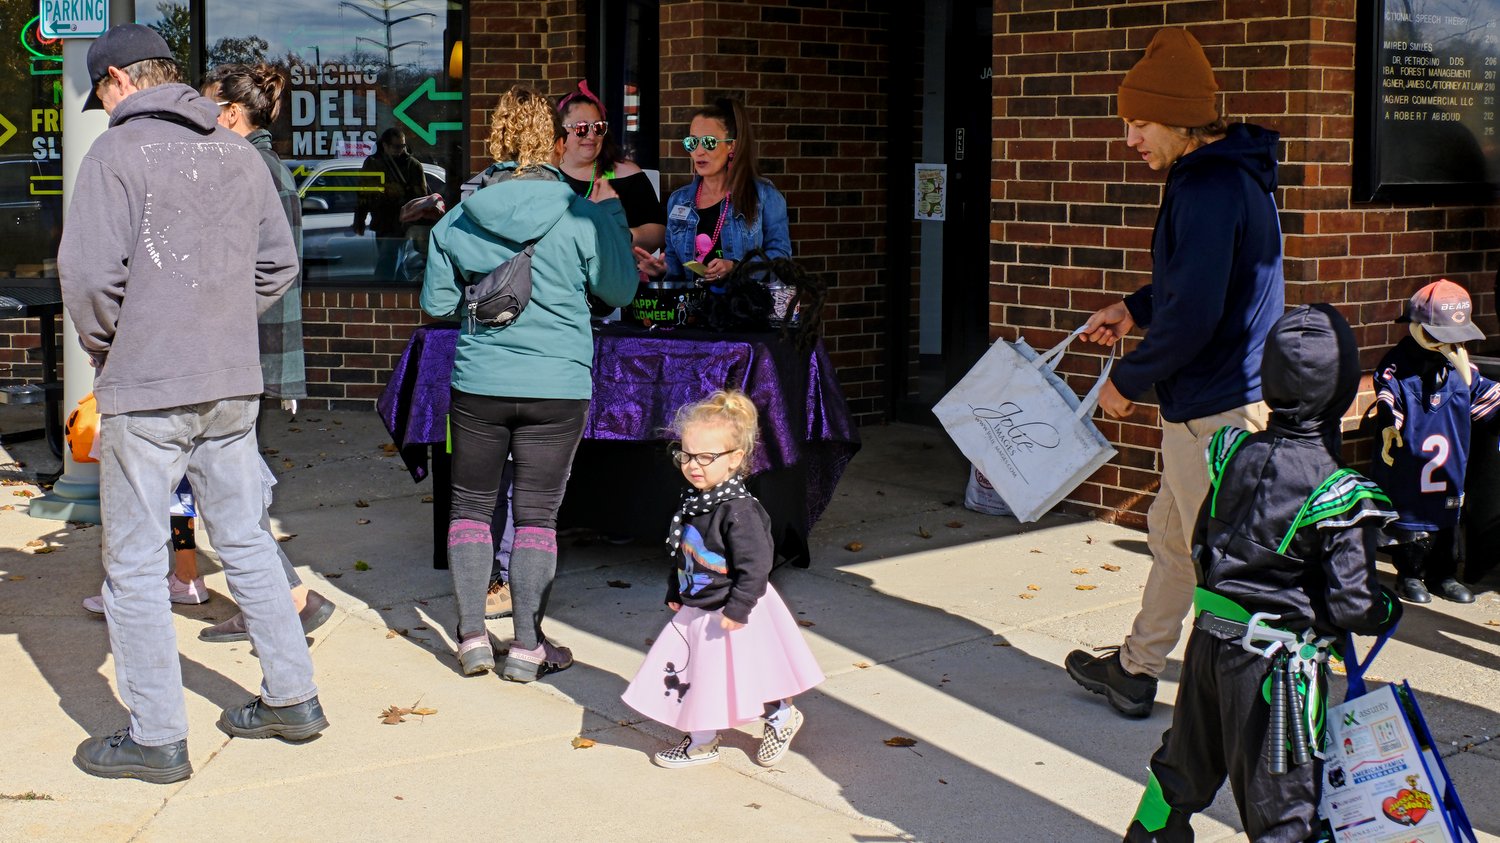 Trick-or-treaters at a strip mall in Fox River Grove.